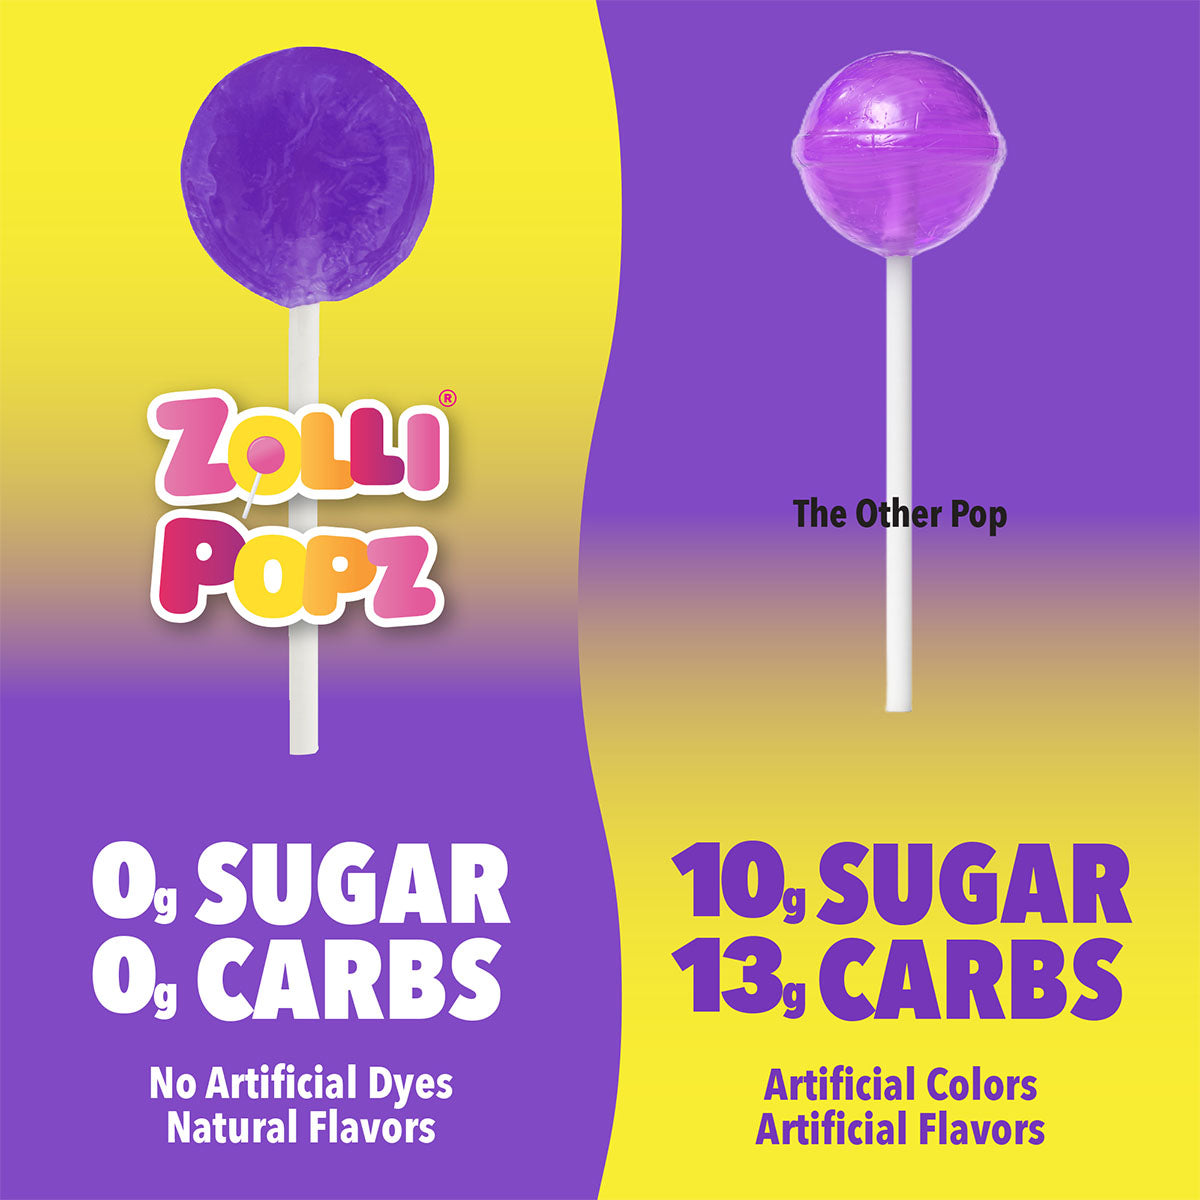 Zollipops have 0 grams of sugar and carbohydrates. Competing lollipops 10 grams of sugar and 13 grams of carbs.